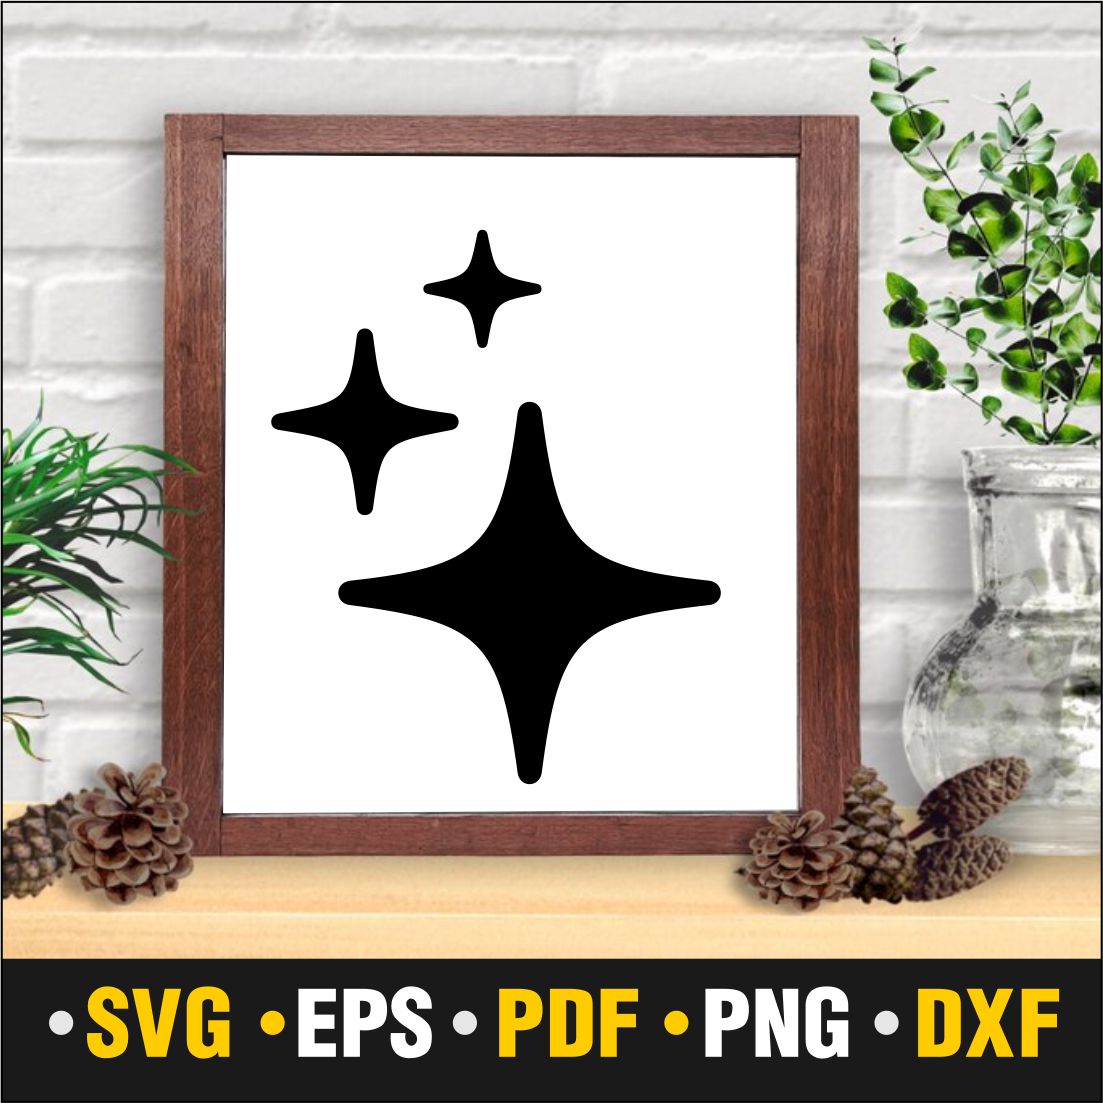 Beautiful silhouette image of stars in a wooden frame